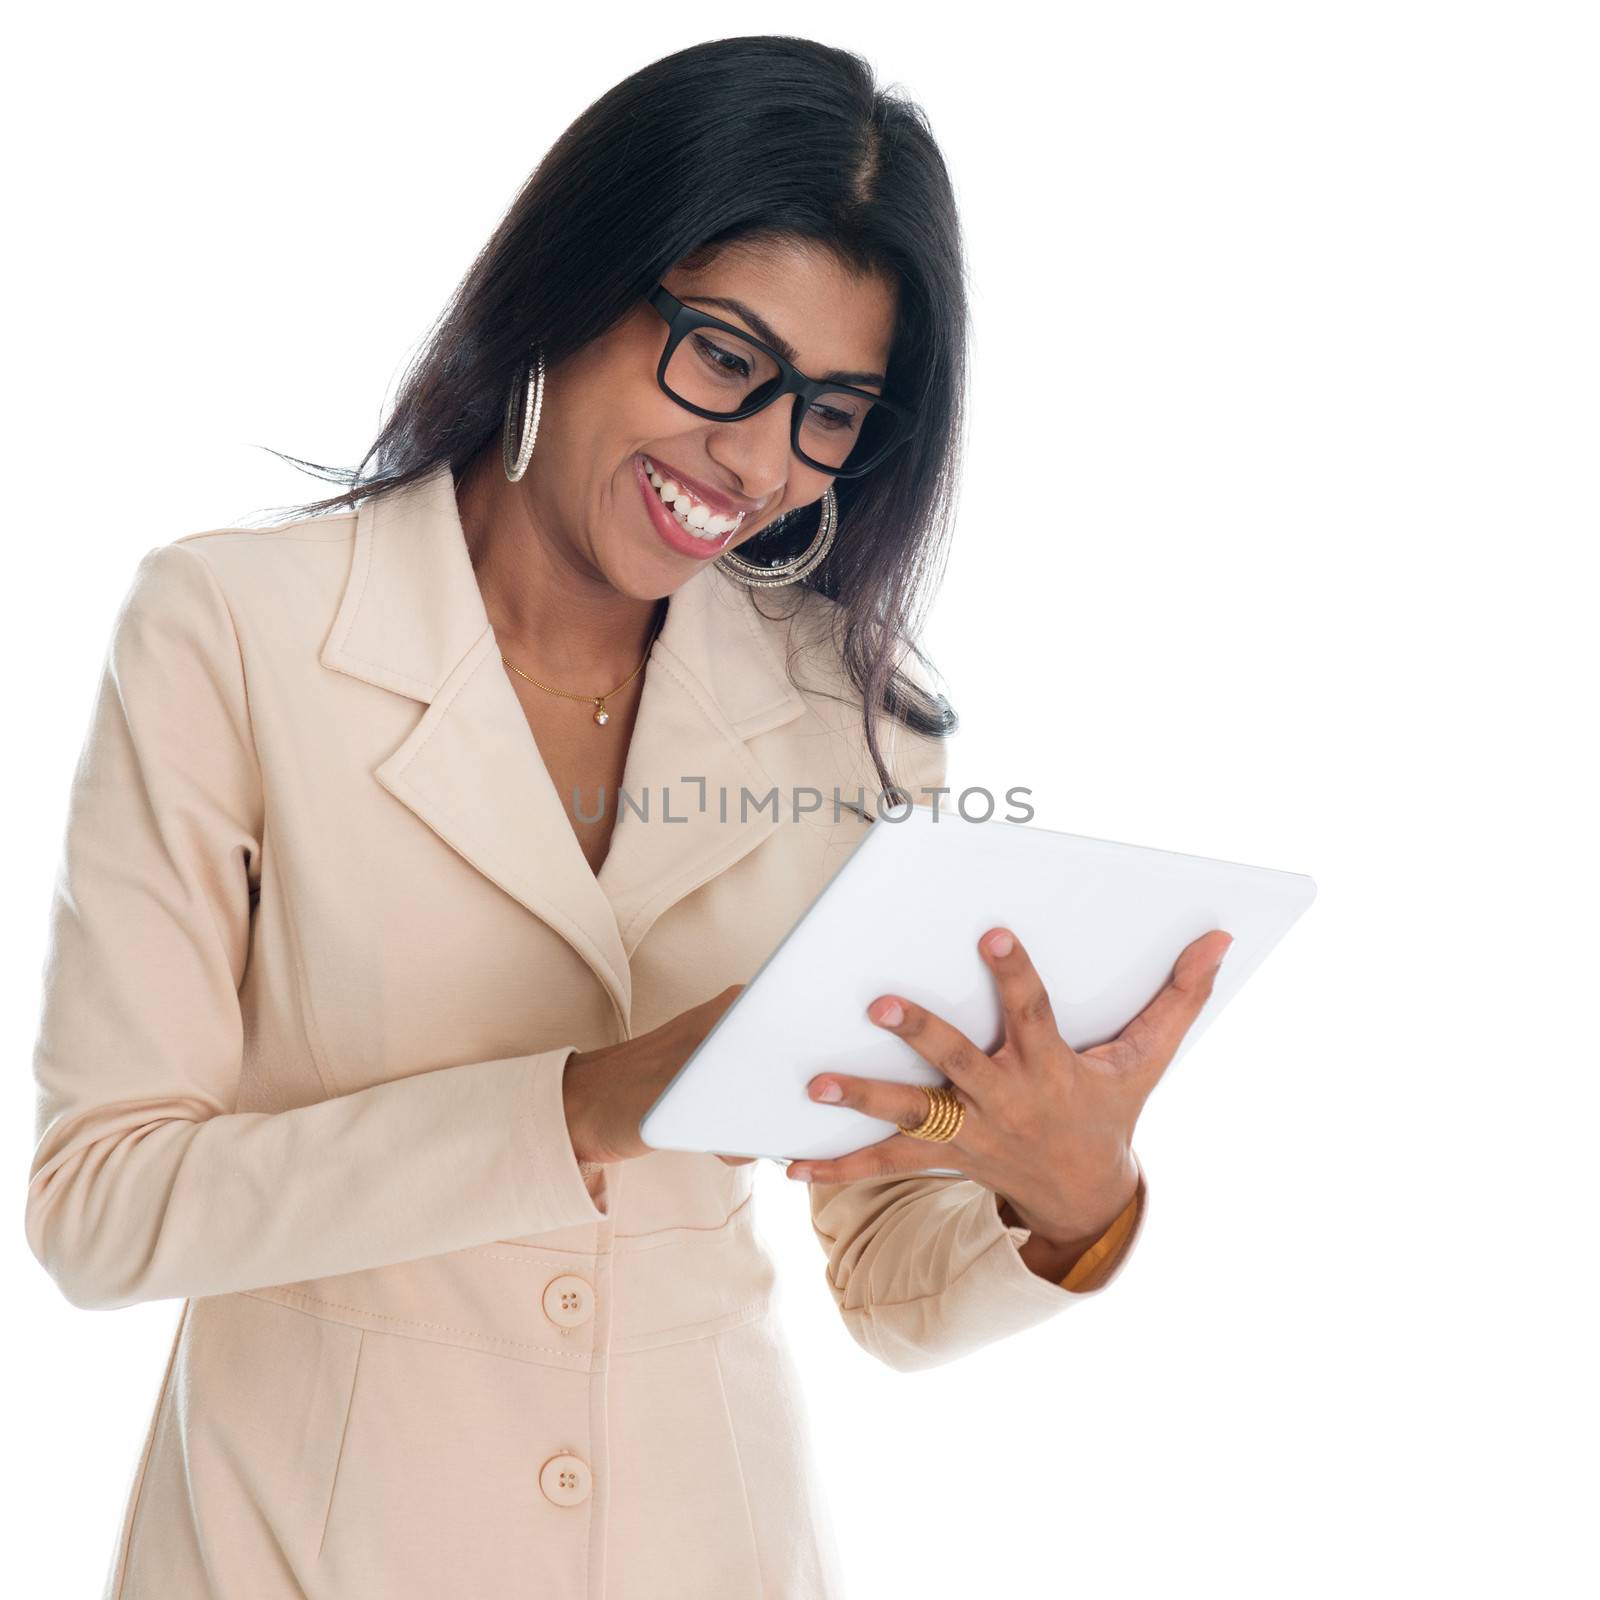 Indian businesswoman working with digital tablet pc. India office woman using digital tablet pc. Portrait of beautiful Asian female model isolated on white background.